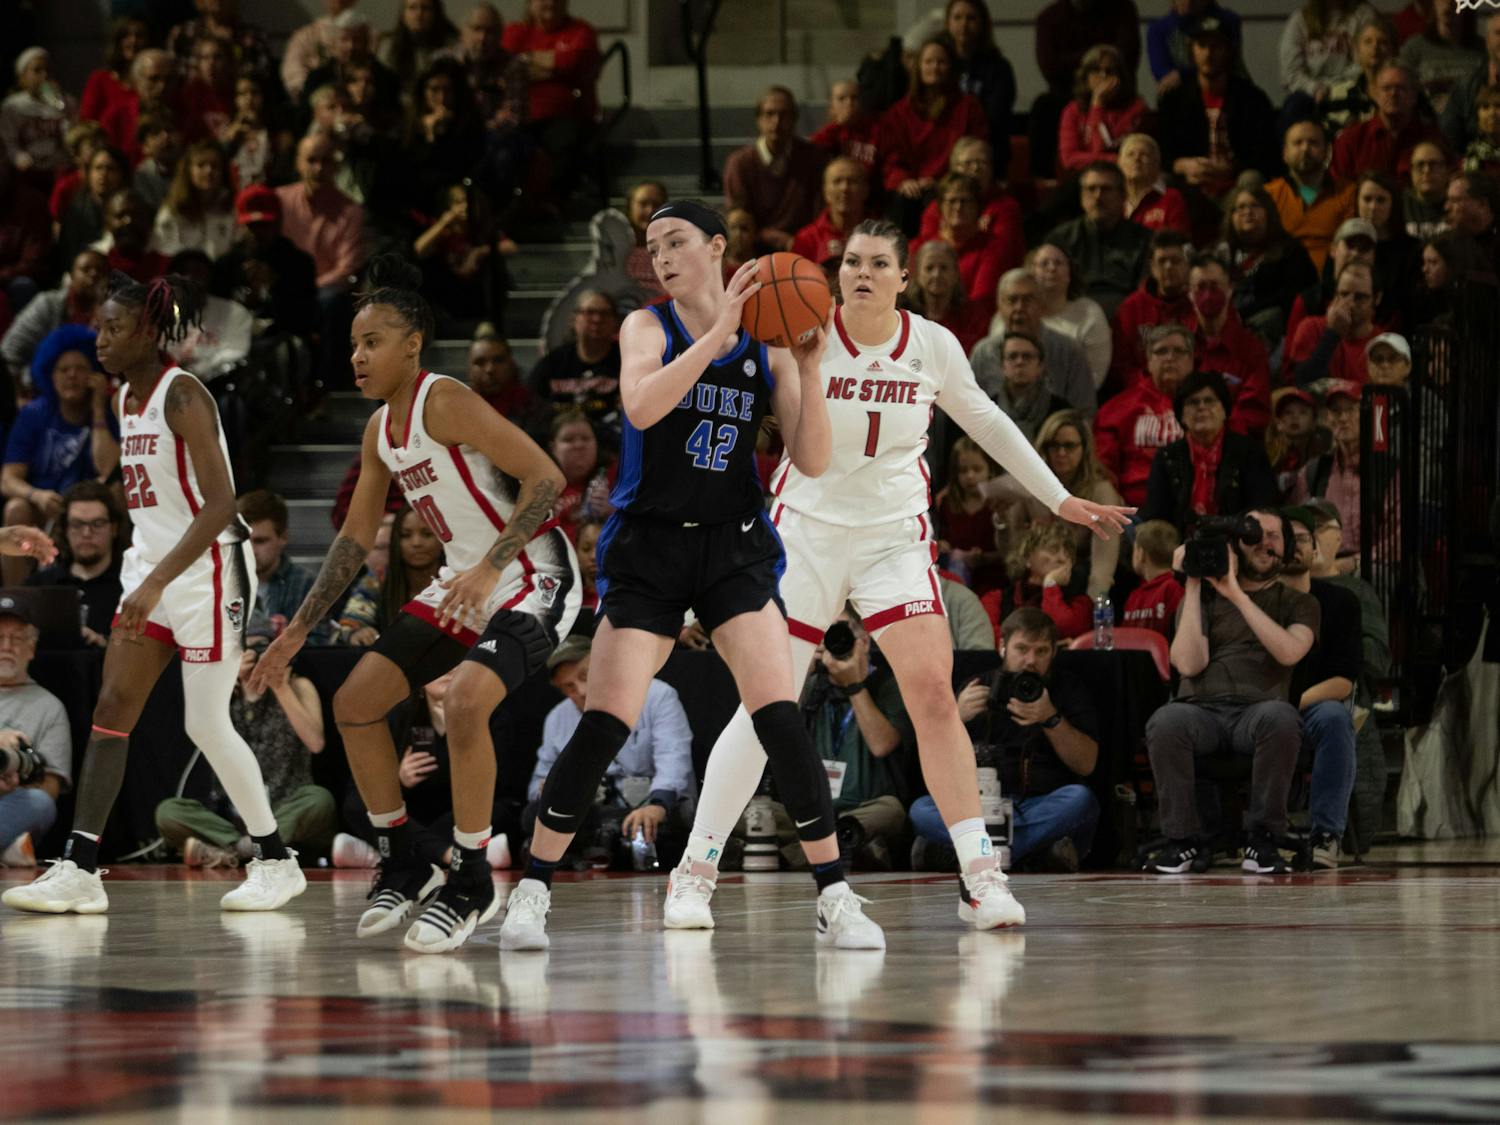 Kennedy Brown holds the ball up during Duke's loss against N.C. State.